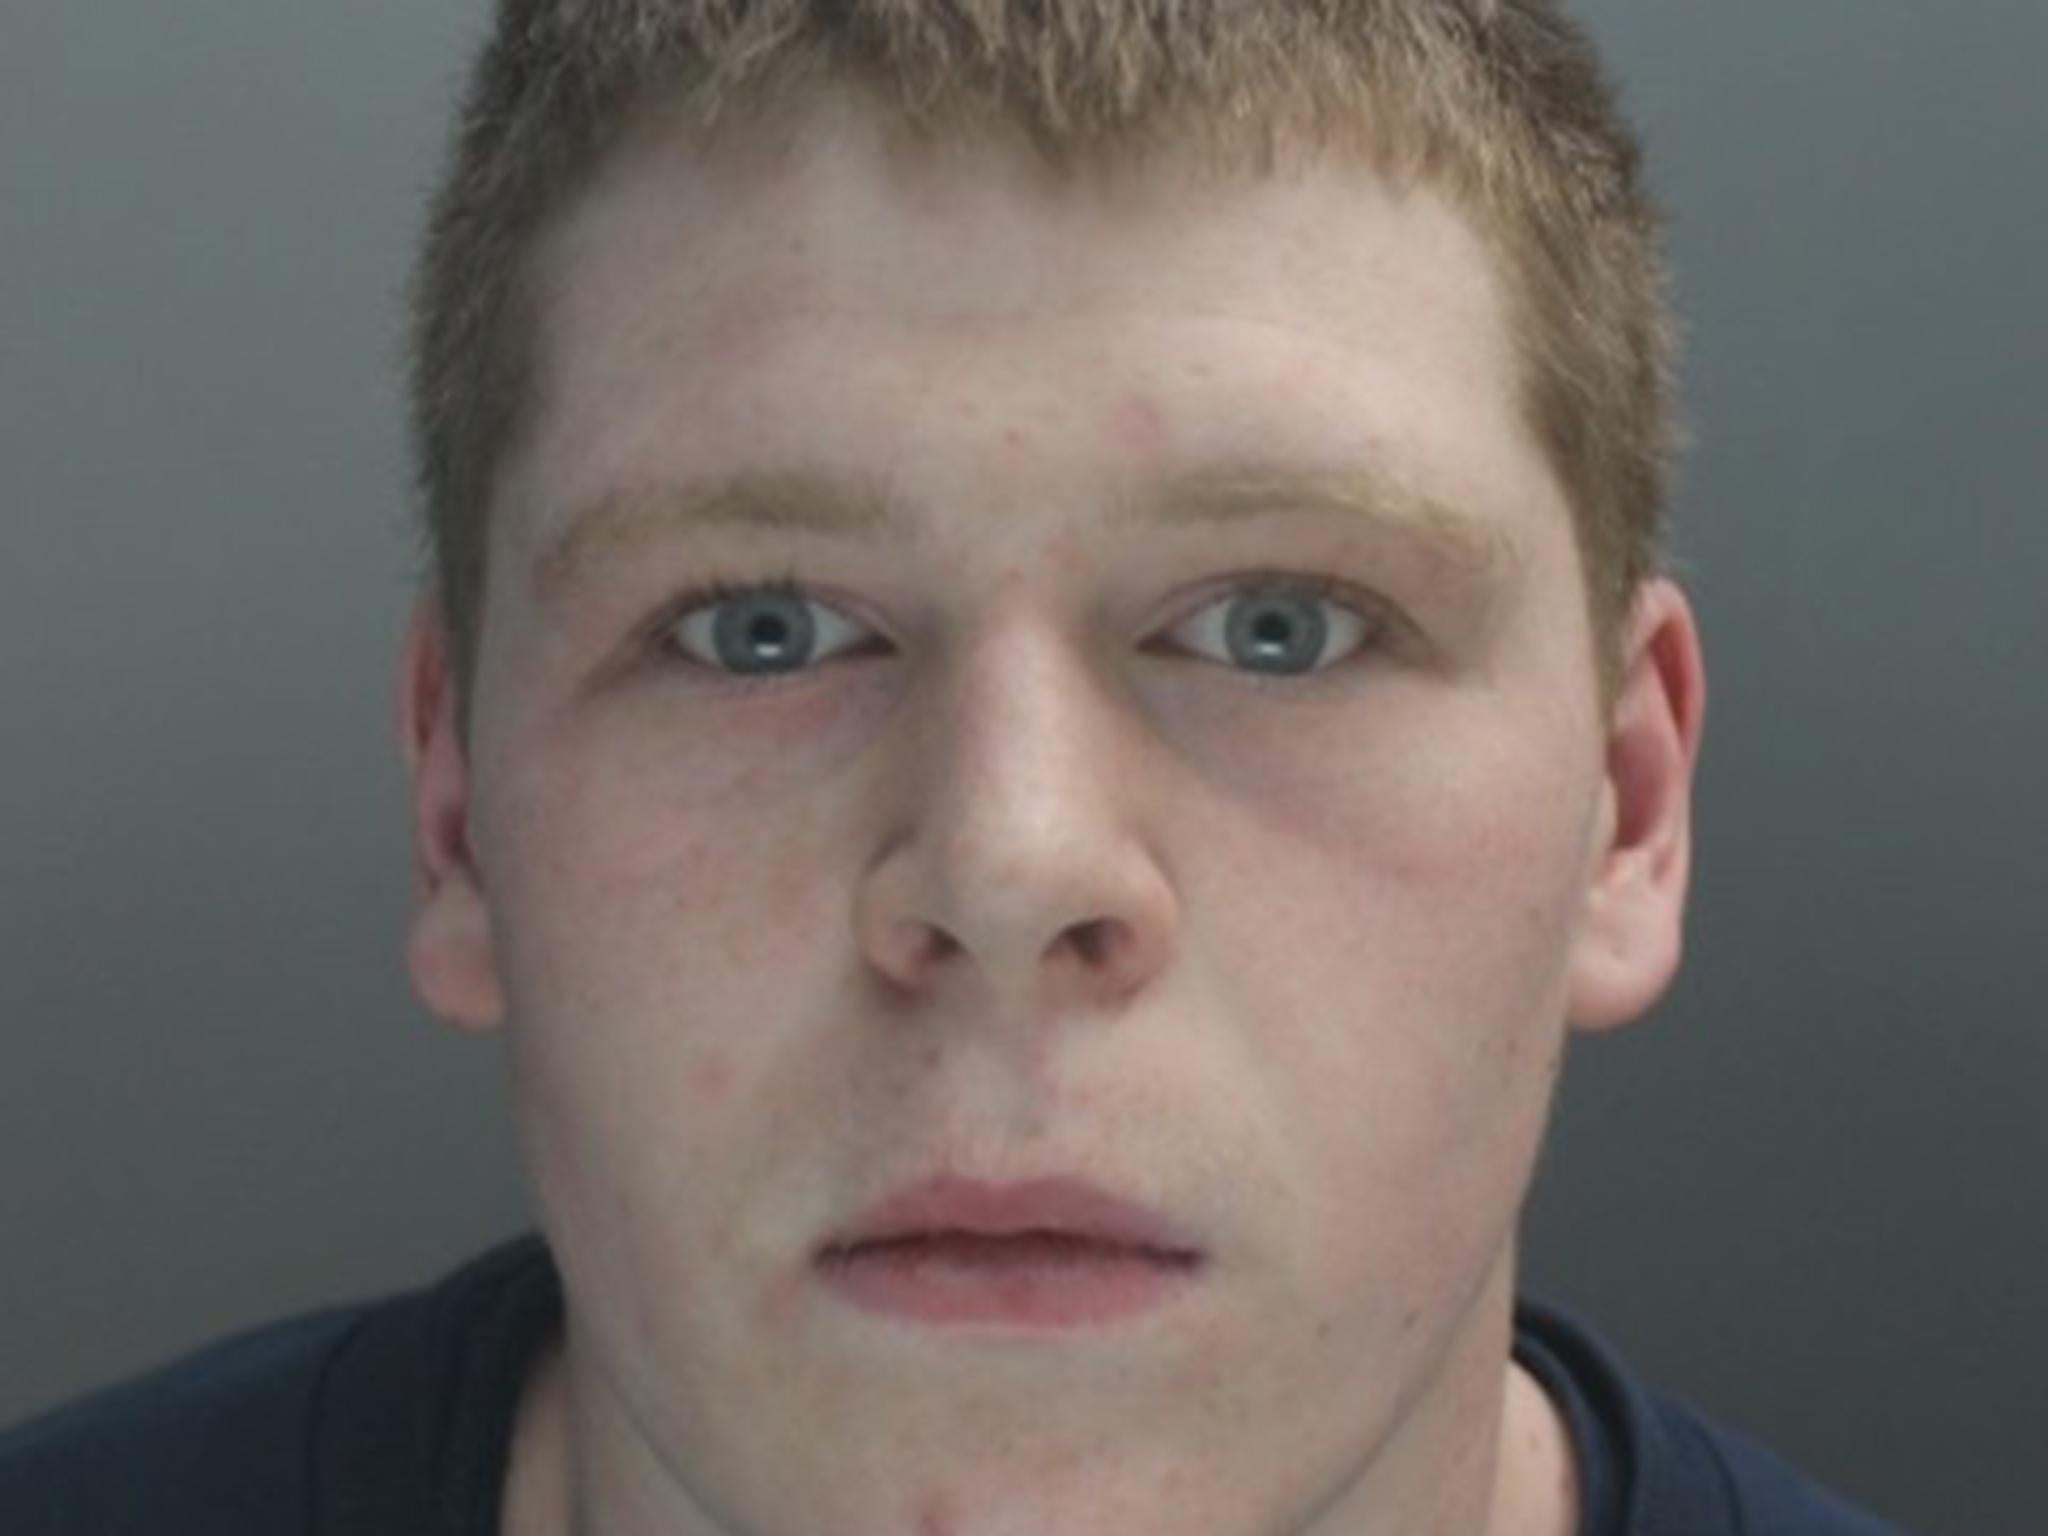 Clarke was sentenced to seven and a half years in a young offencers' institution after being convicted of several firearms offences